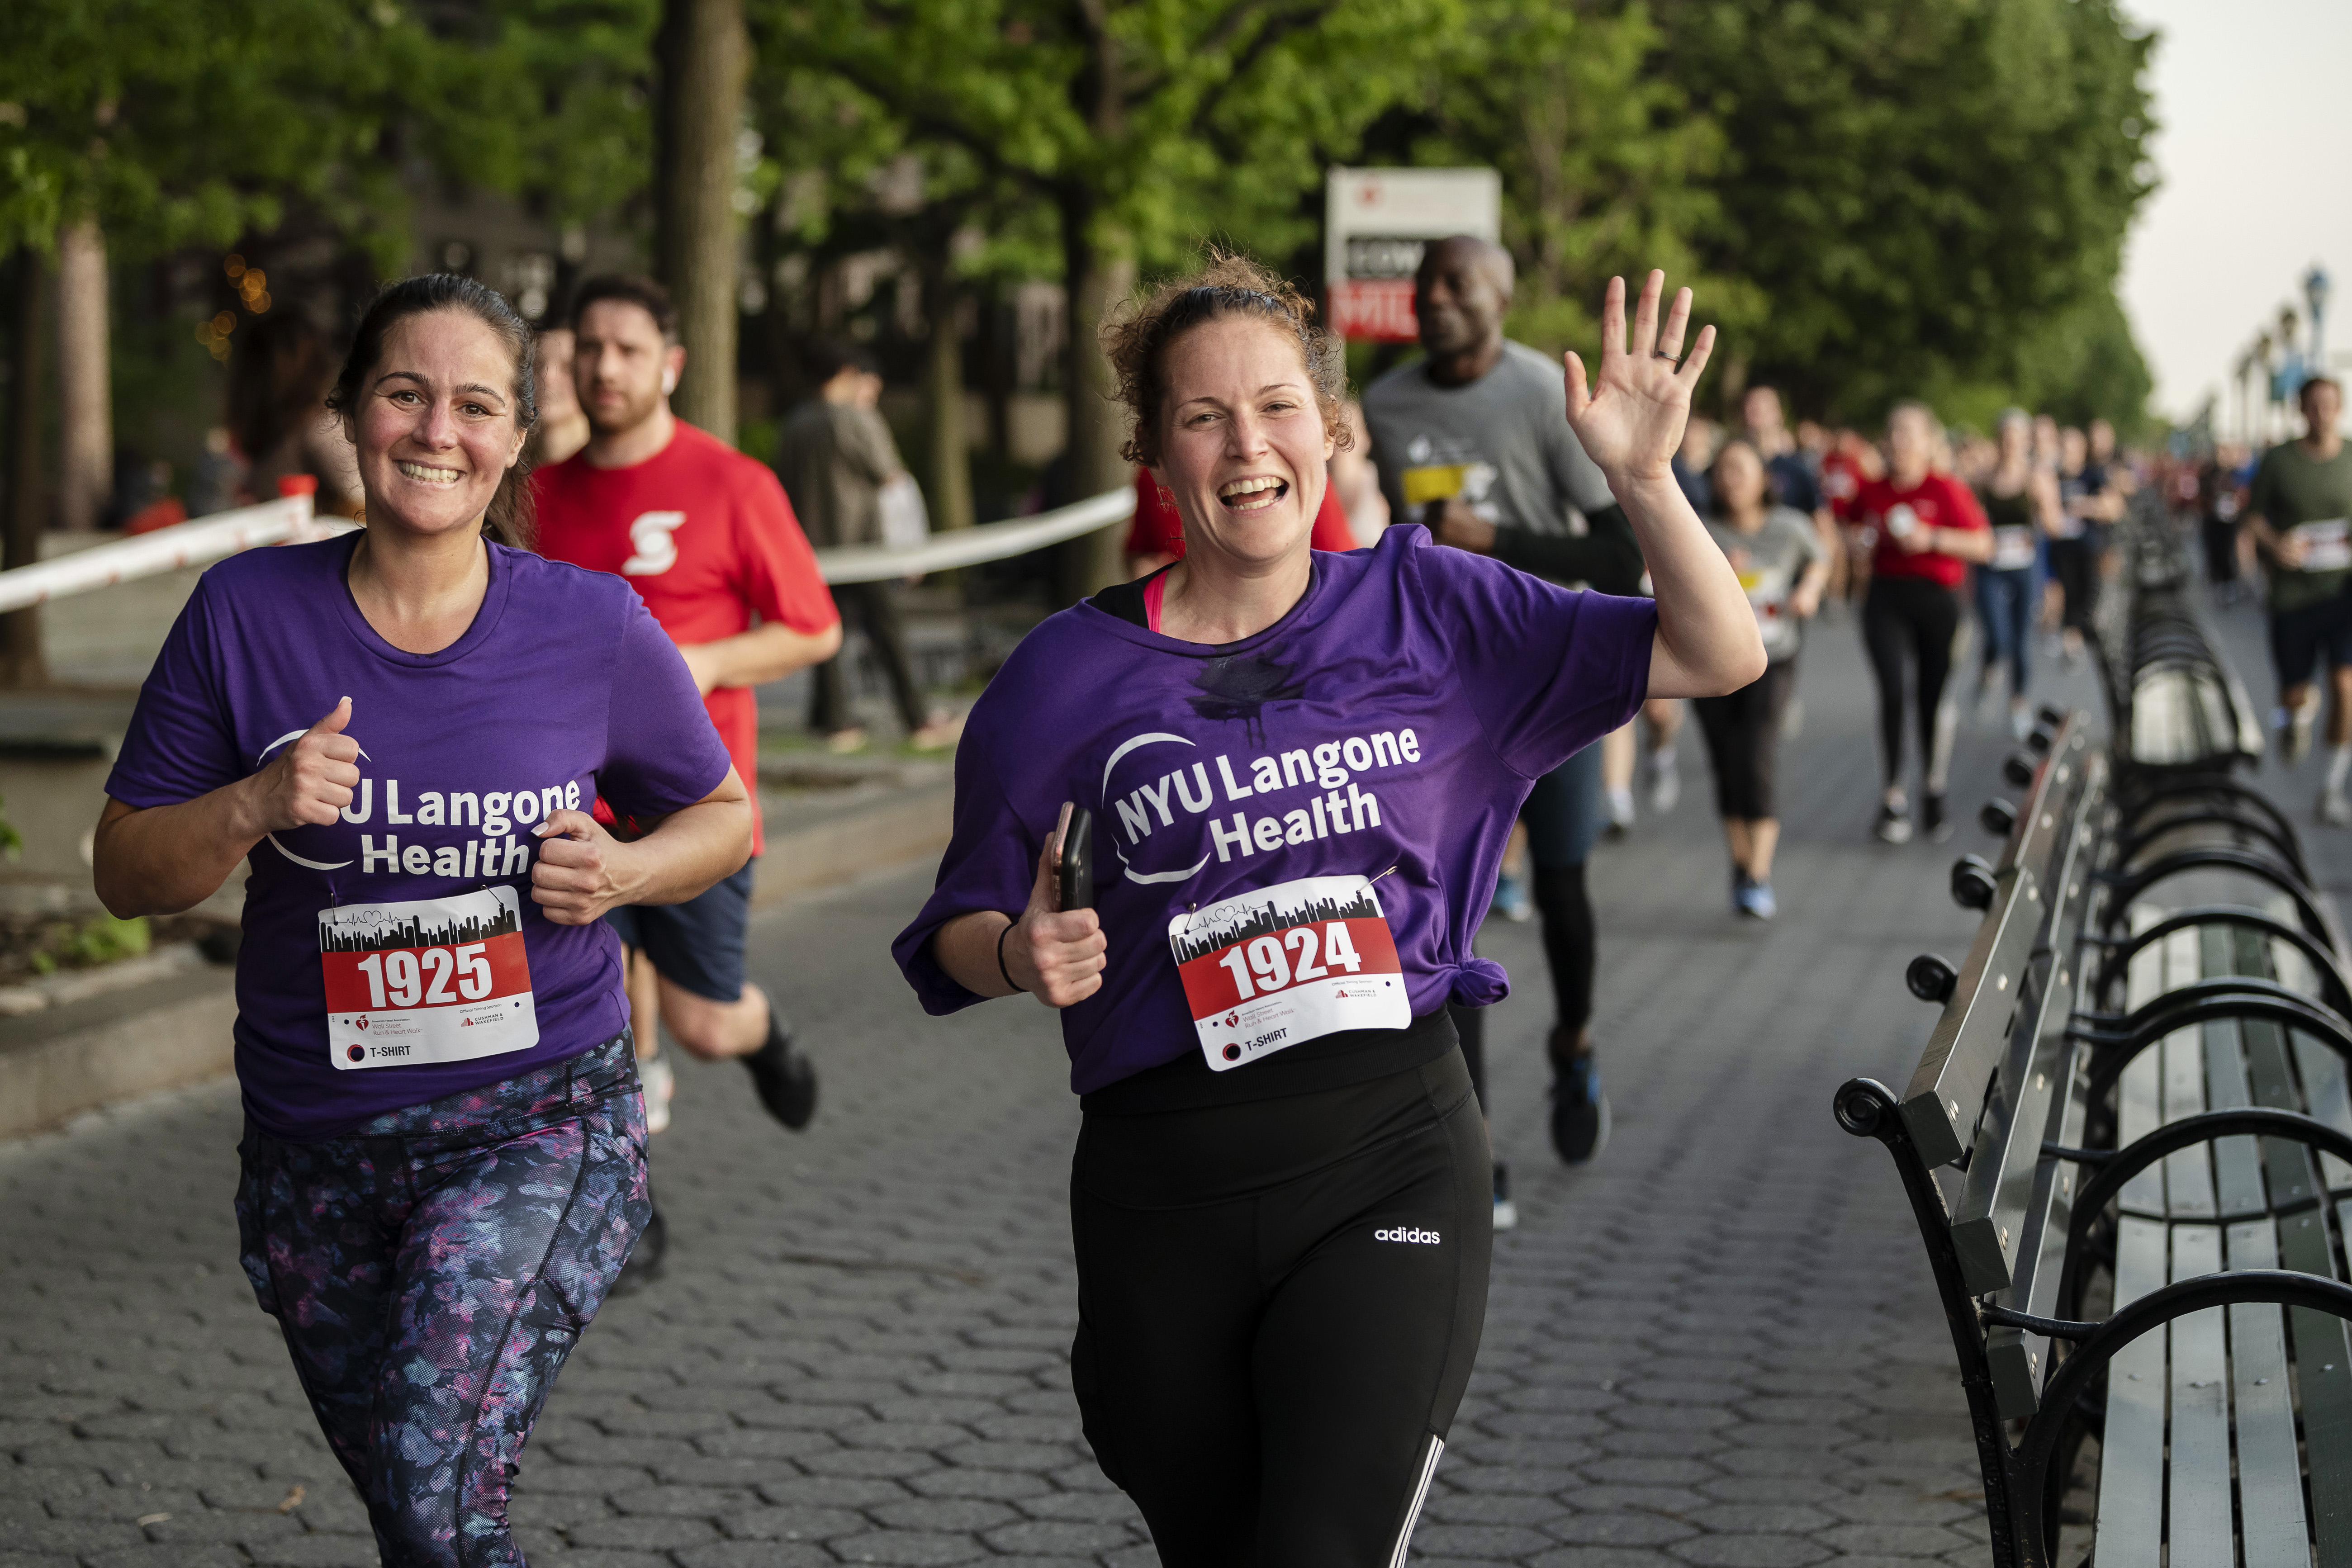 May 19, 2022 - New York, NY : NYU Langone Health Sponsors and participates in the American Heart Association 2022 Wall Street Run &amp; Heart Walk. **Photo taken for NYU Langone Health -- this picture may have been staged, or digitally modified.**